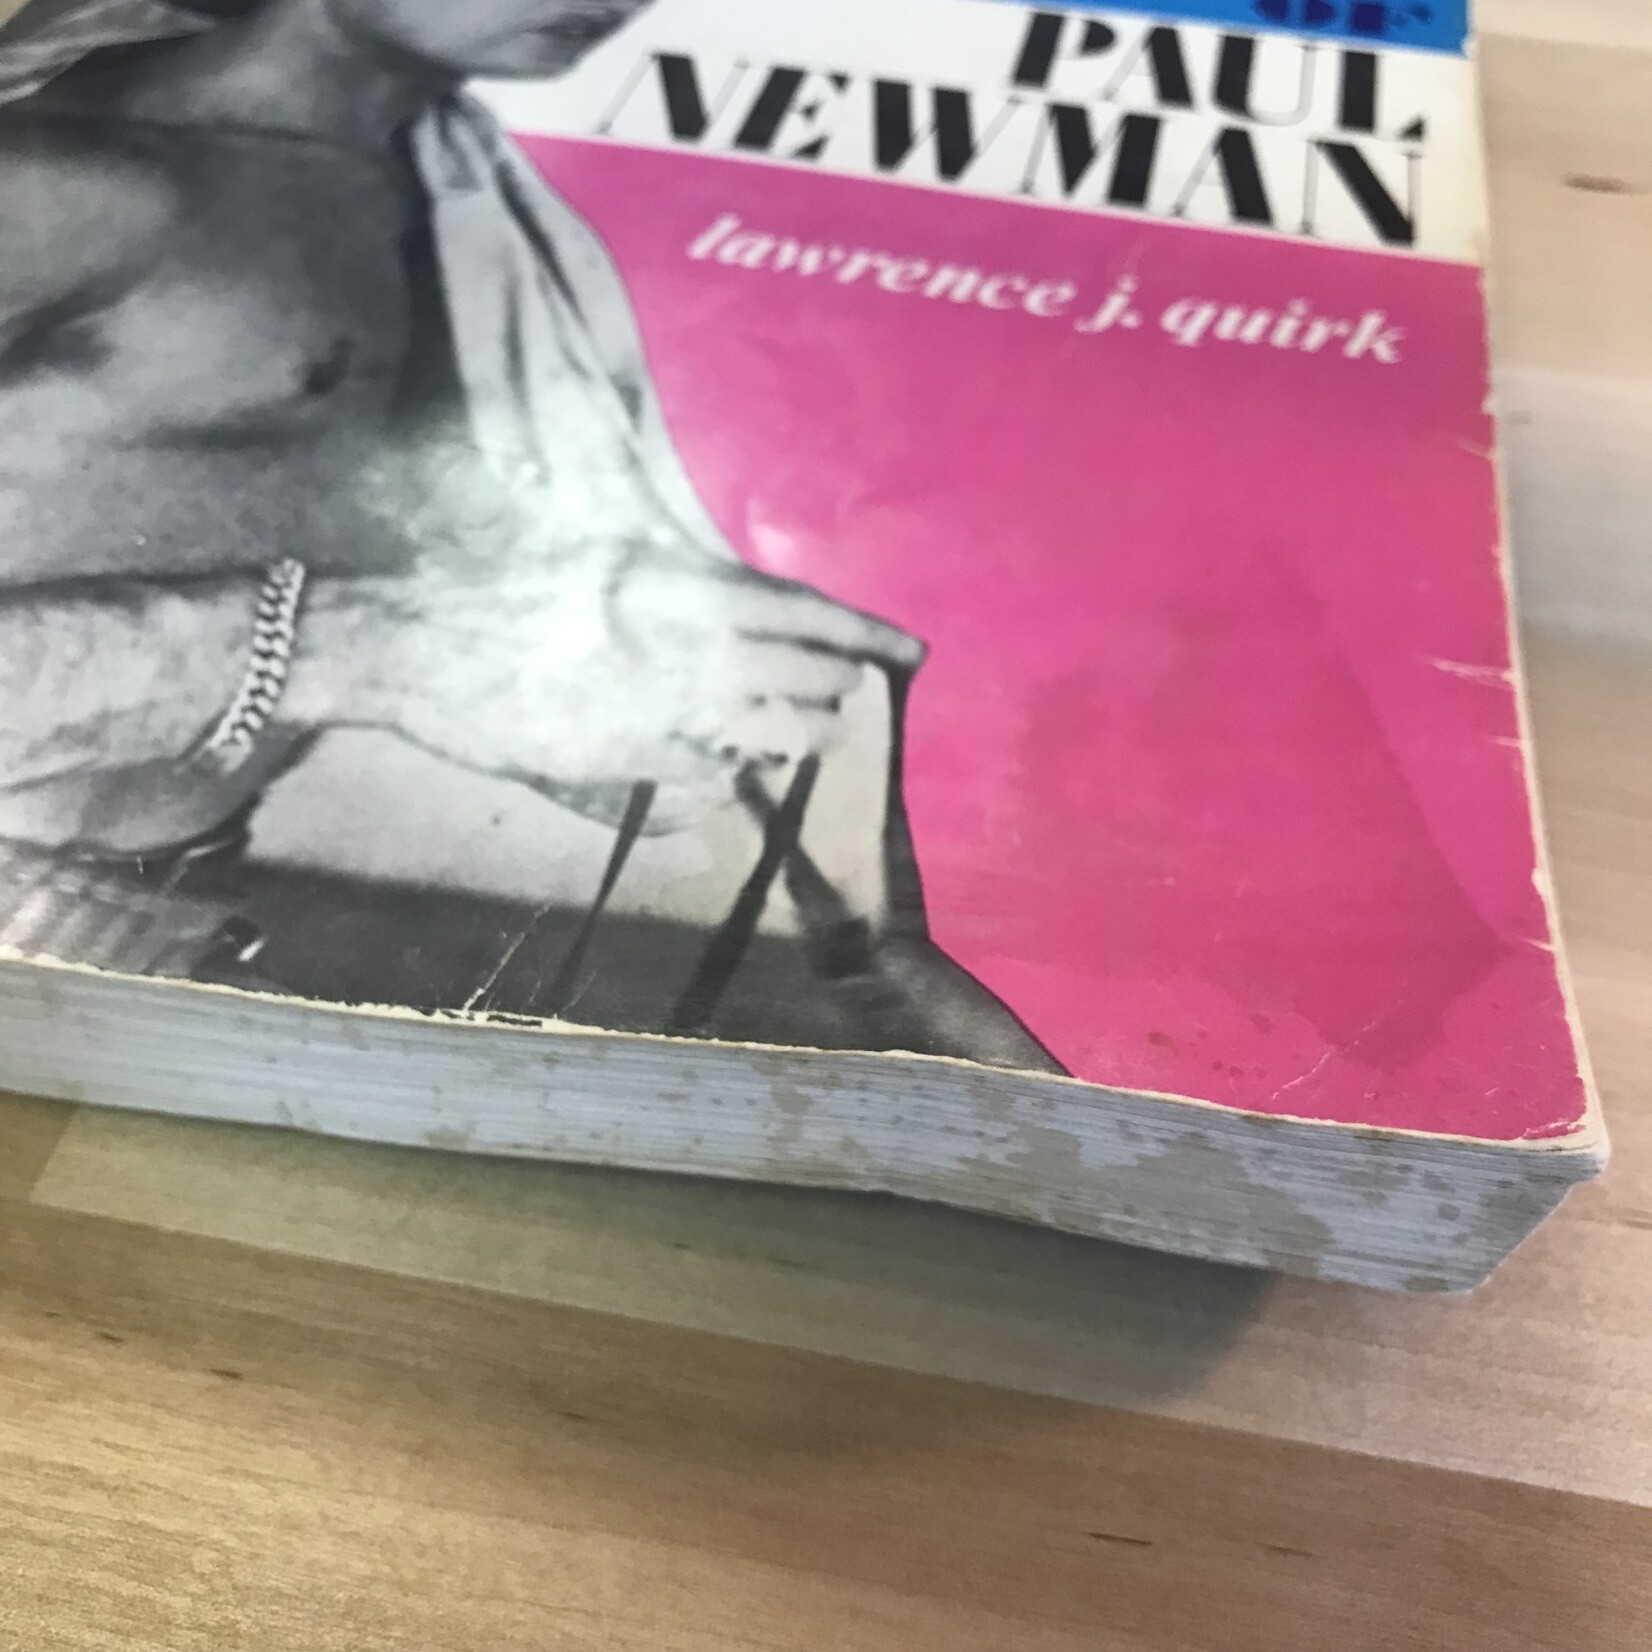 Lawrence J. Quirk - The Films Of Paul Newman - Paperback (USED)